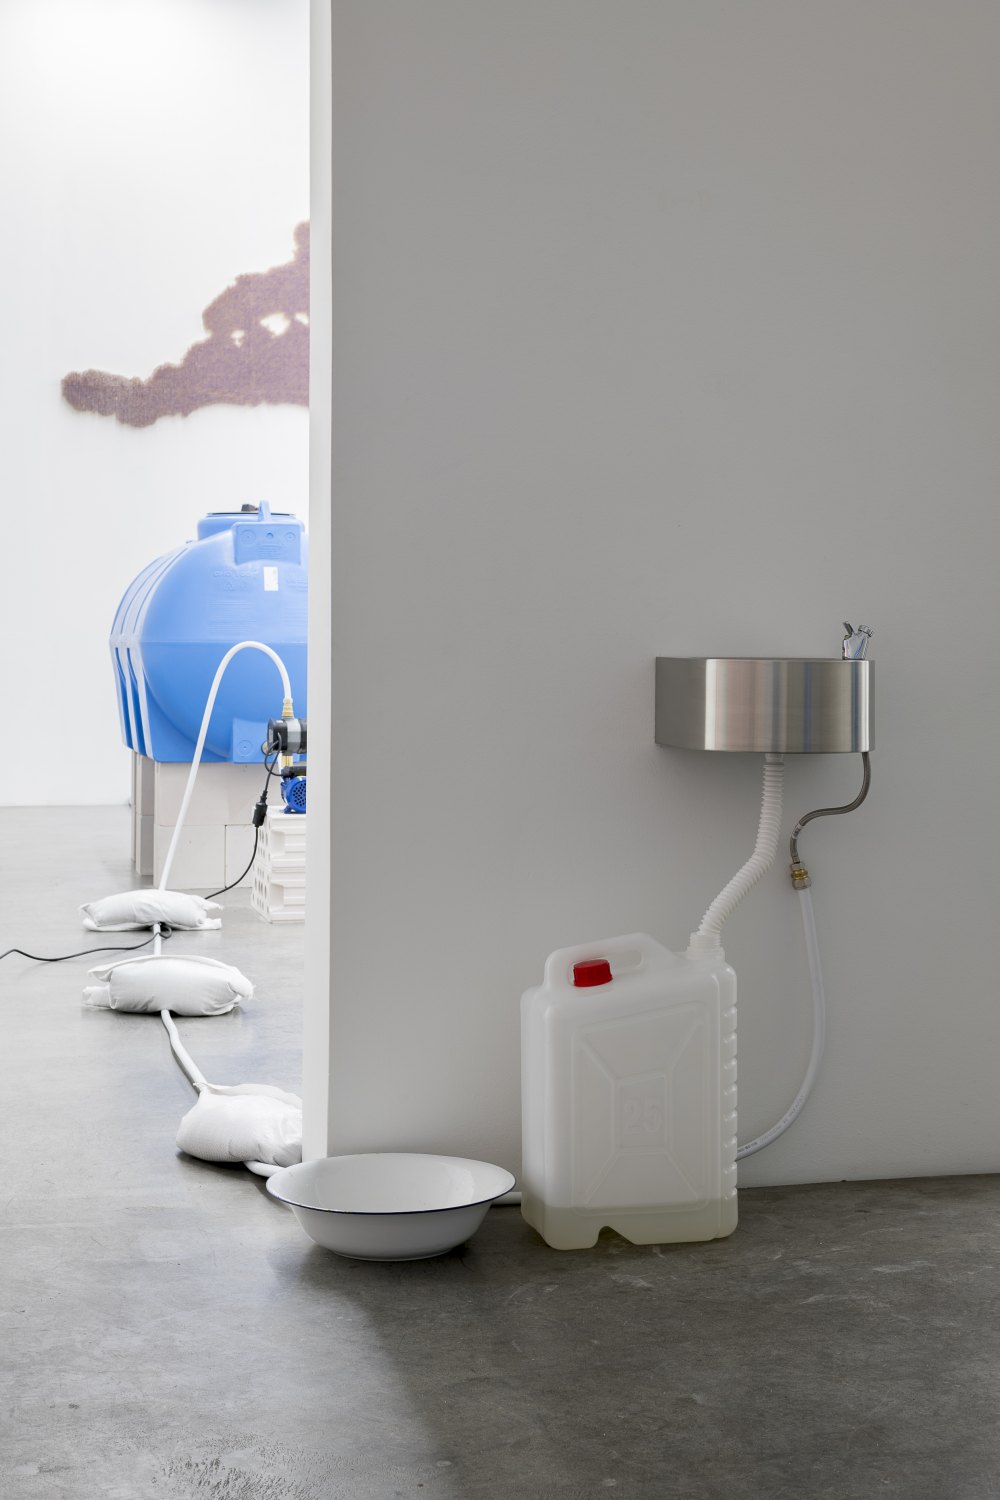 Claire Fontaine La mer à Boire, 2023 1000L blue water tank, pump, automatic pressure controller, 20 mm flexible hydraulic pipe, wall mounted drinking fountain, 80 mm drainage pipes, gerry can, cables, wall mountings and breeze blocks, mains water with 38 grams of salt per litre dimensions variable